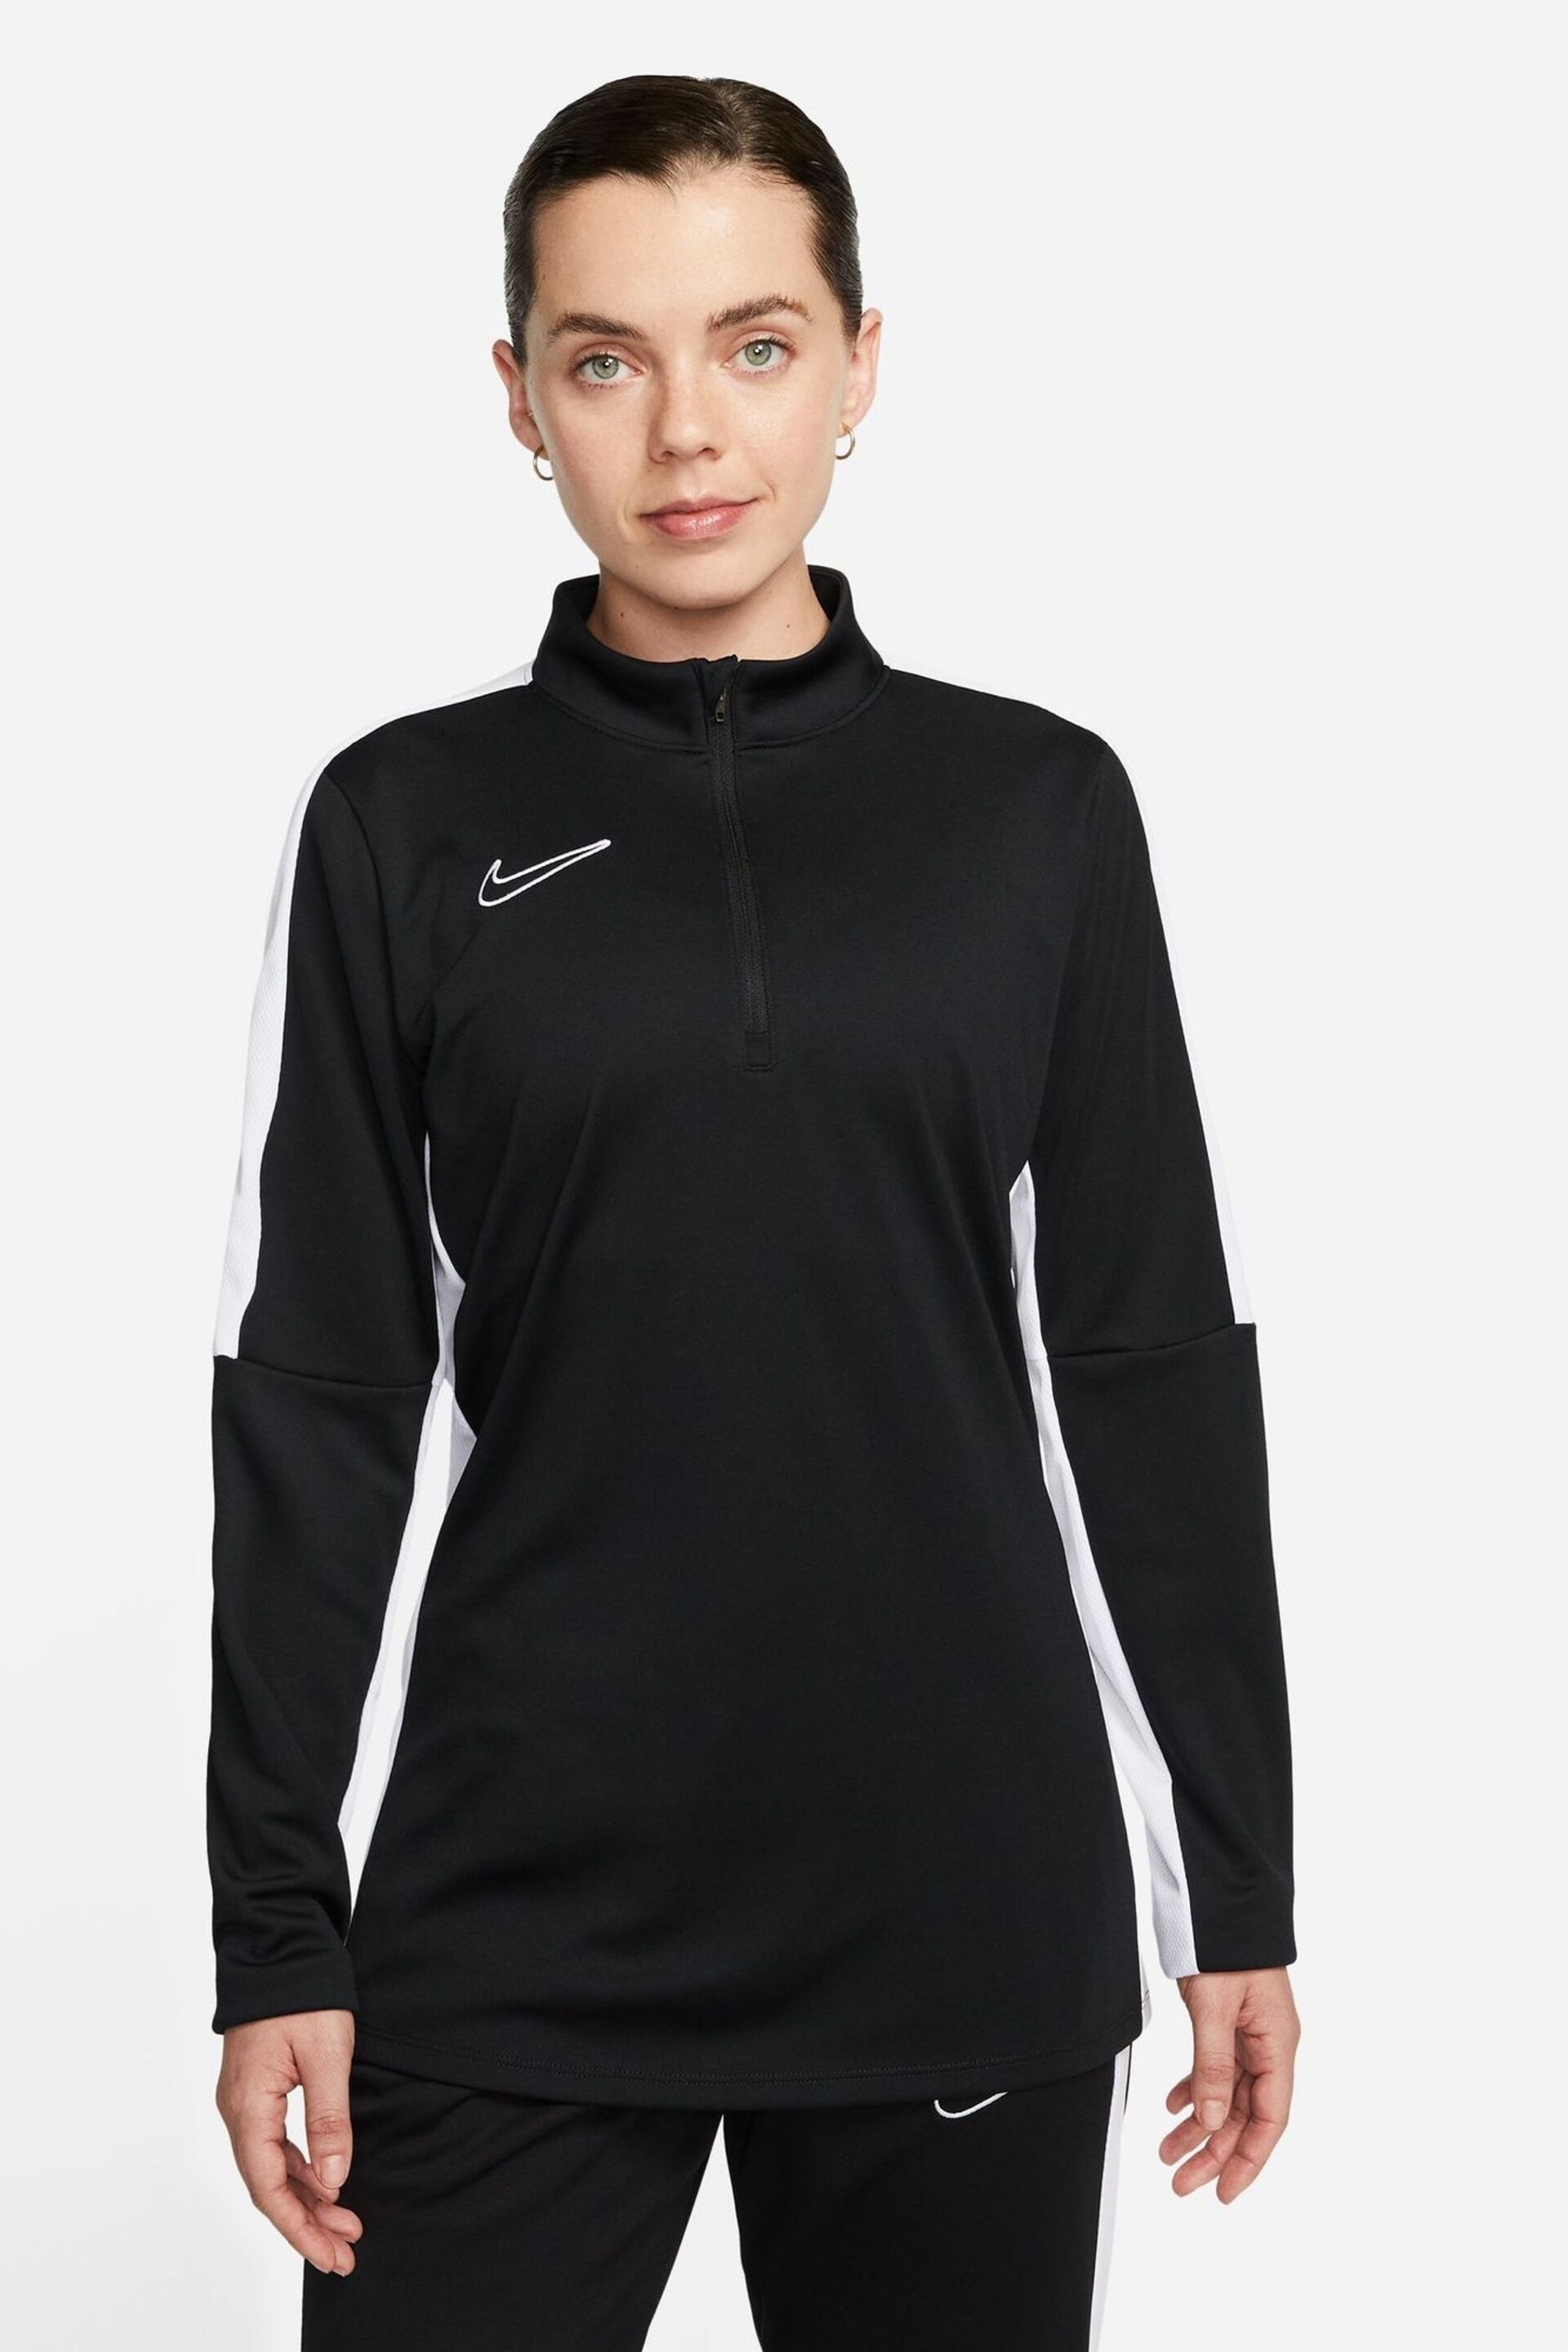 Nike Black/White Dri-FIT Academy Drill Training Top - Image 1 of 5